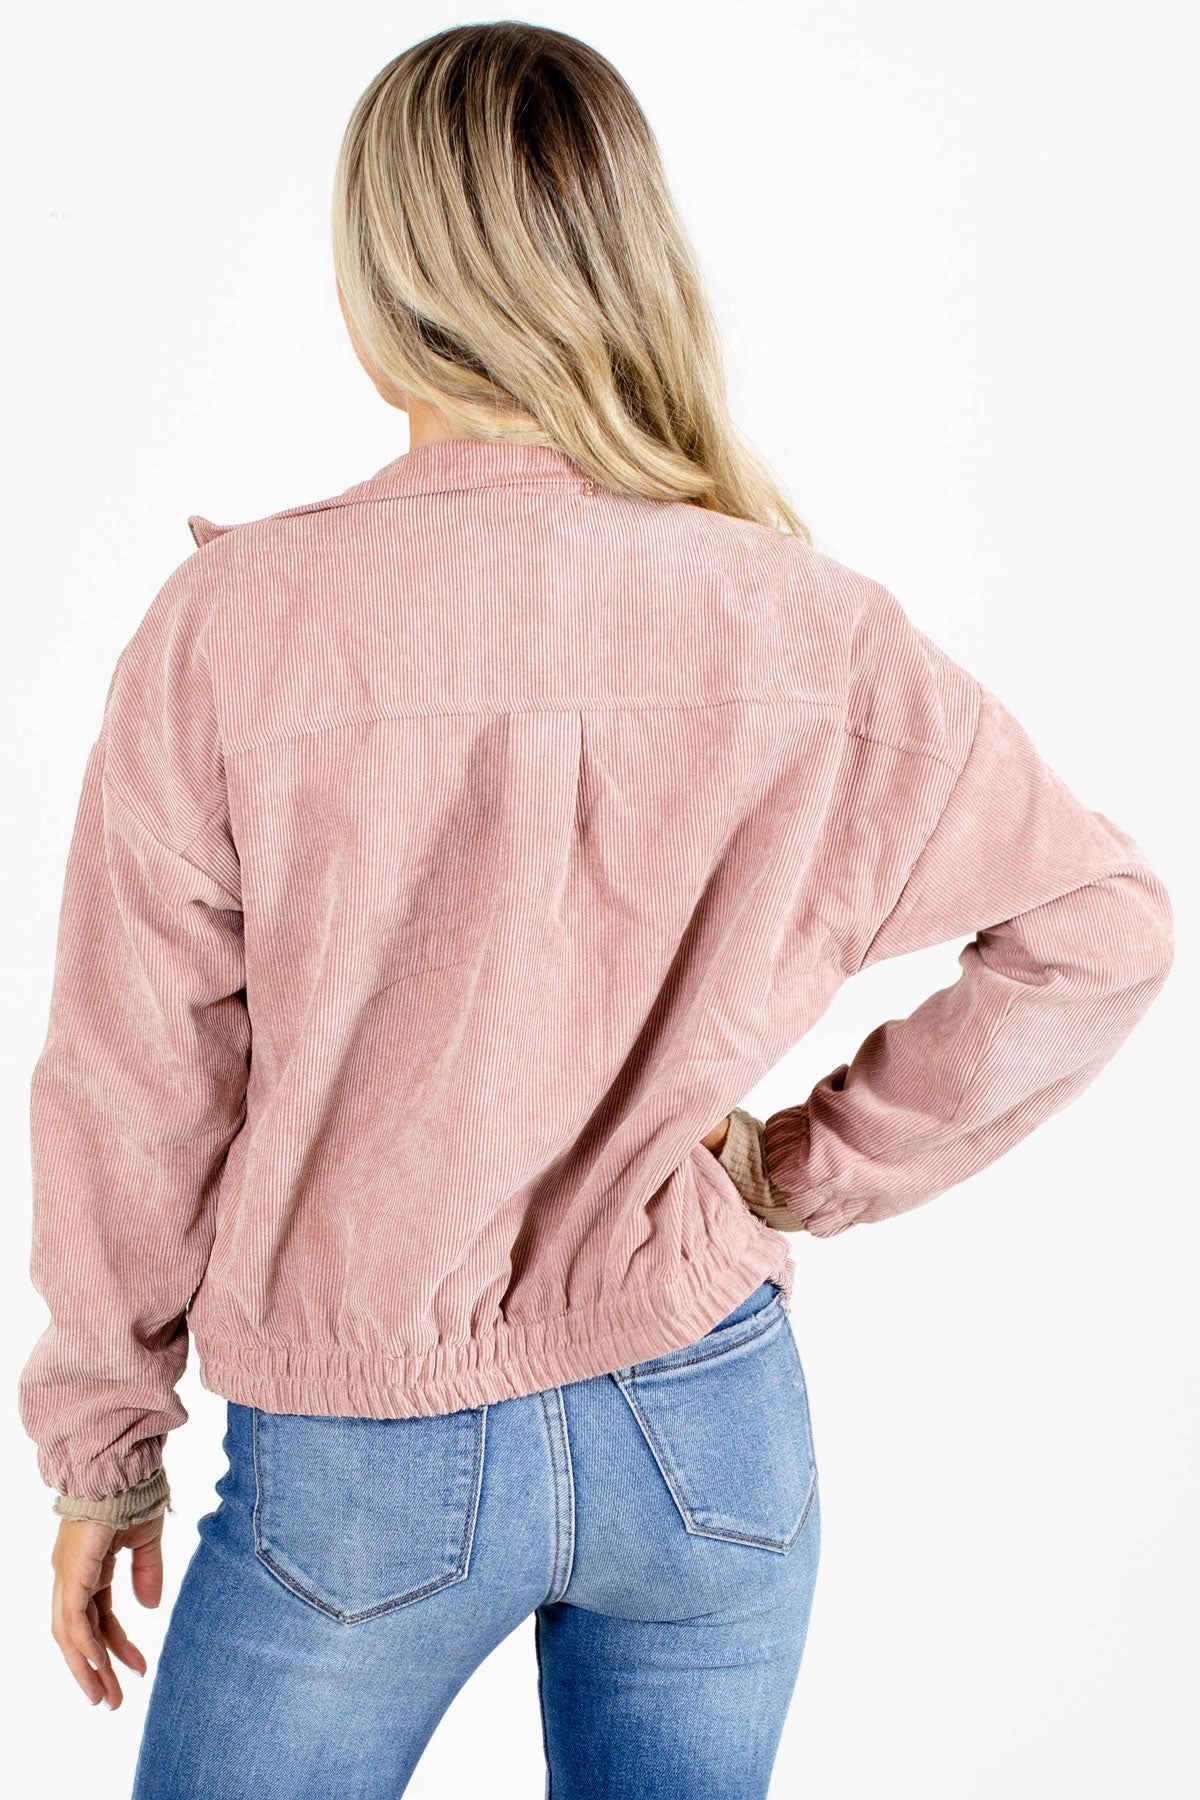 Pink Collared Jacket for Fall